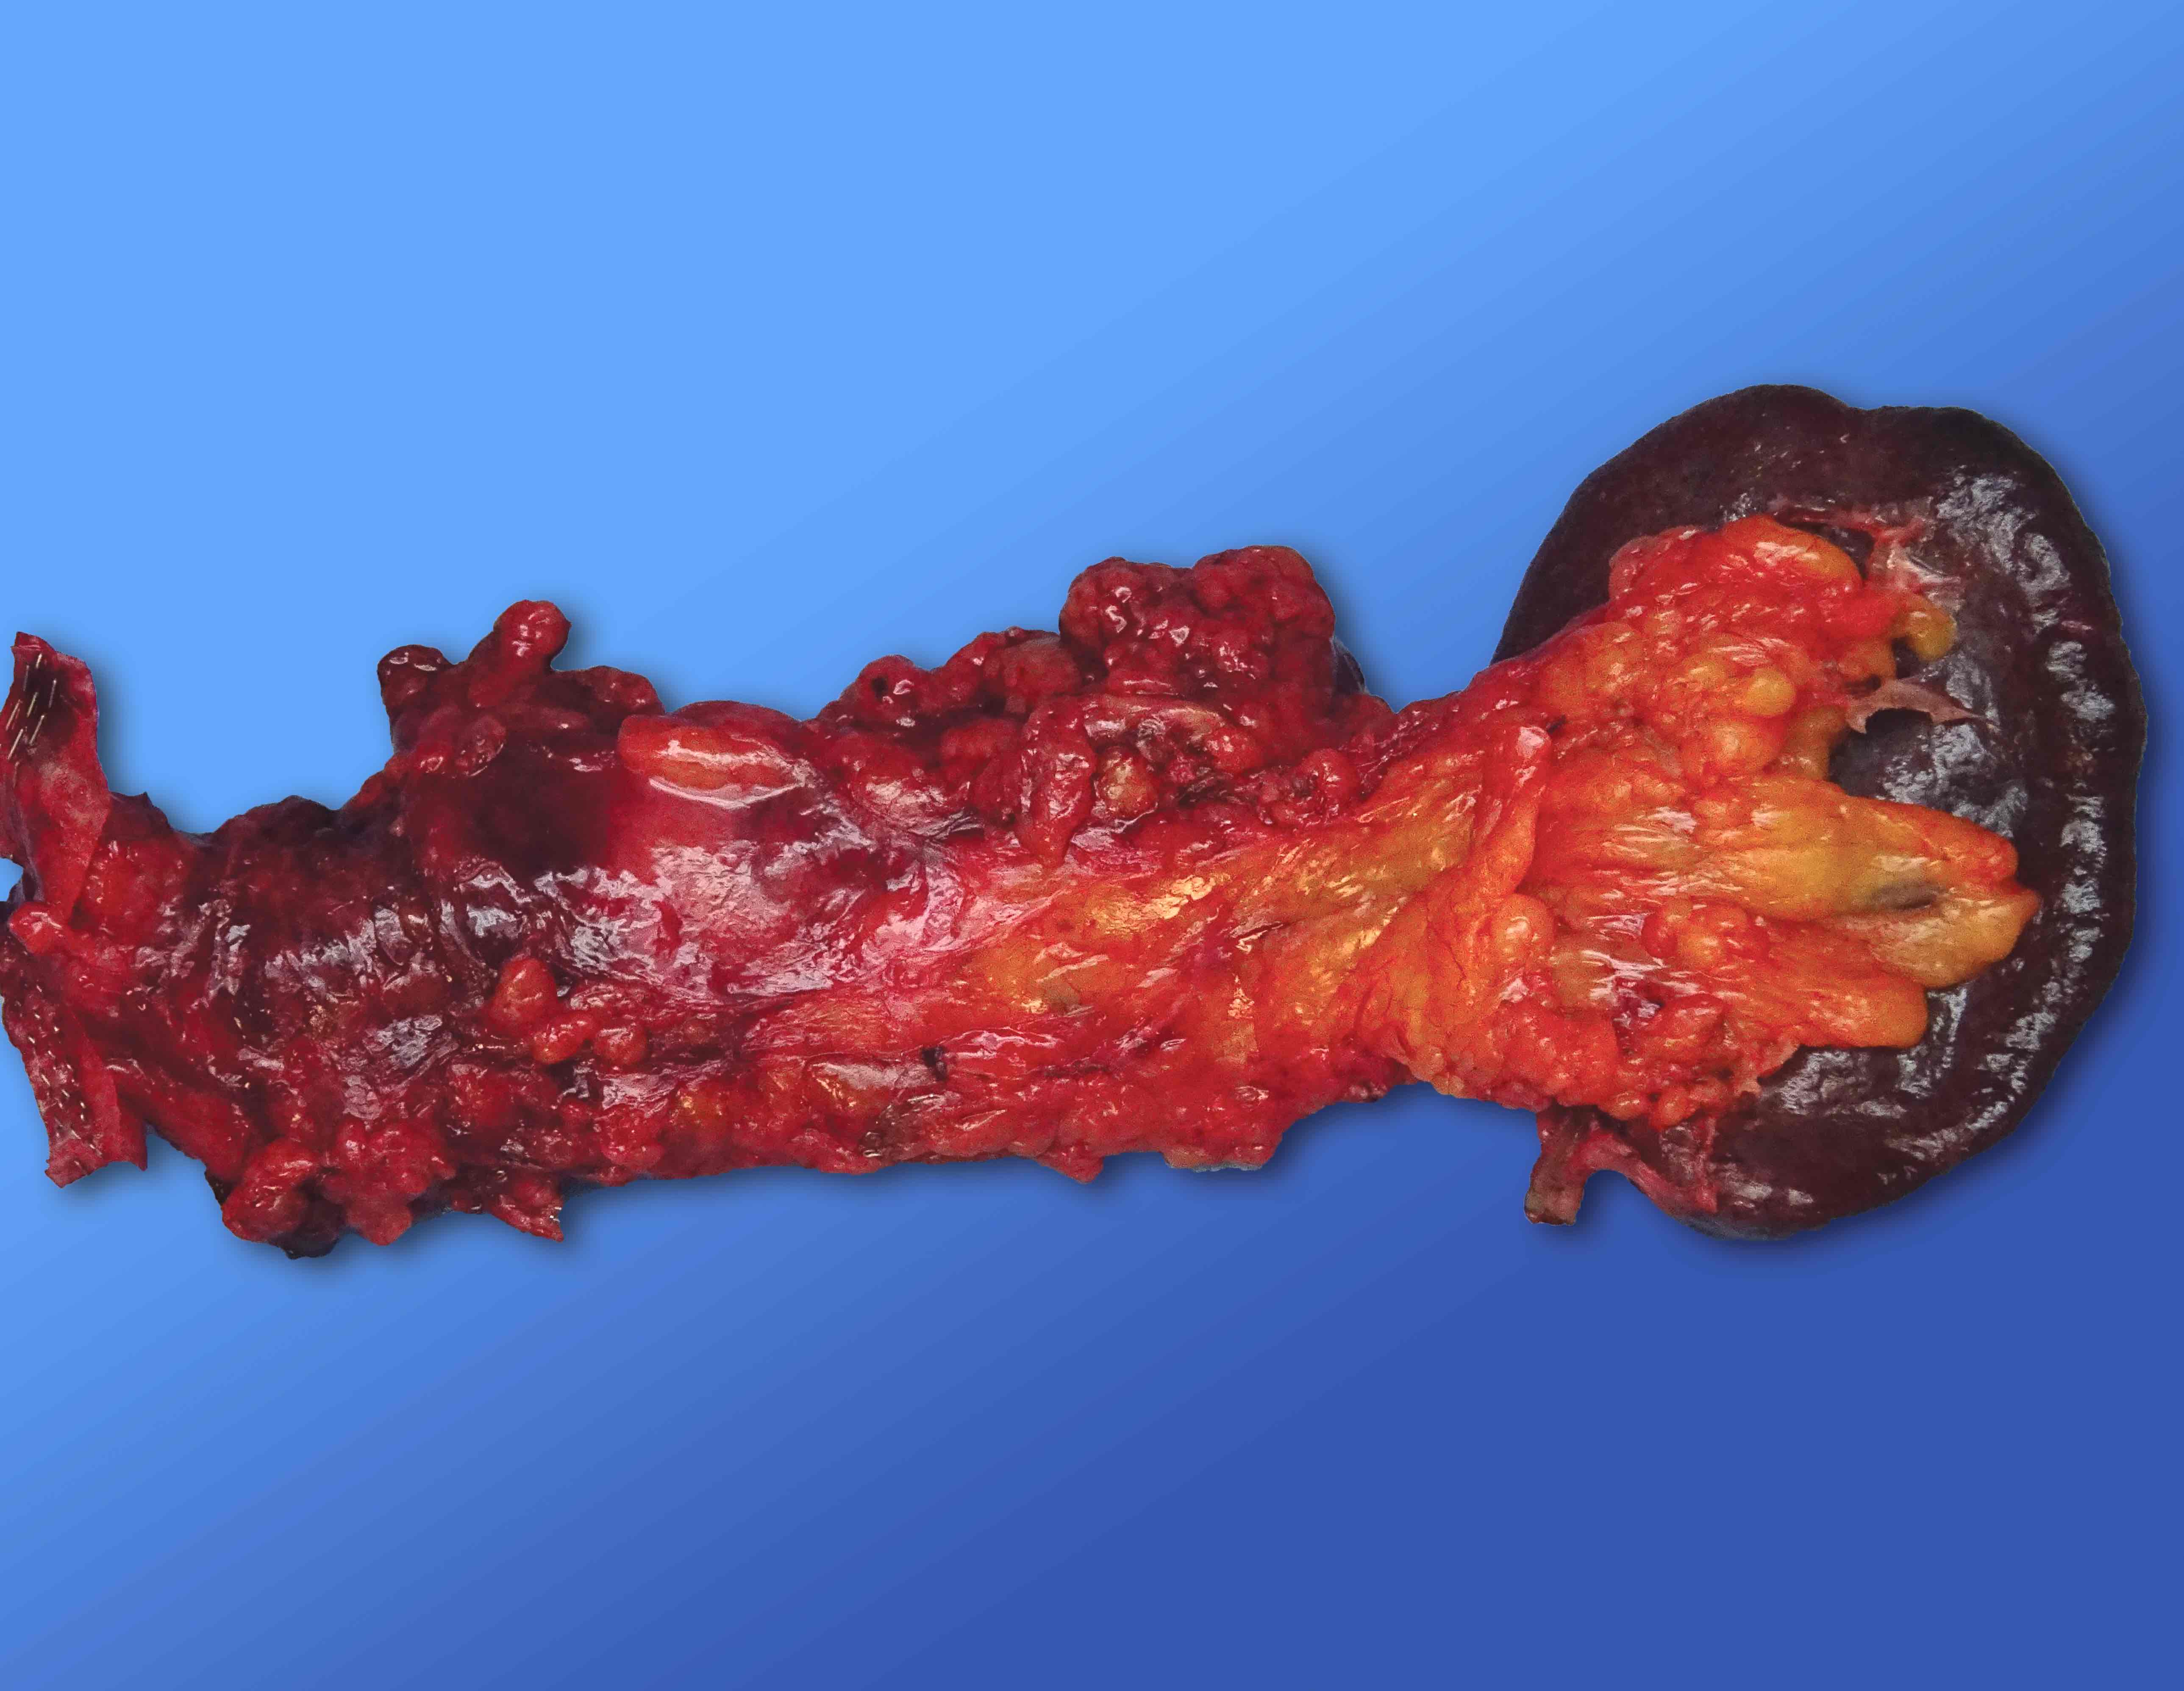 Posterior surface of distal pancreatectomy